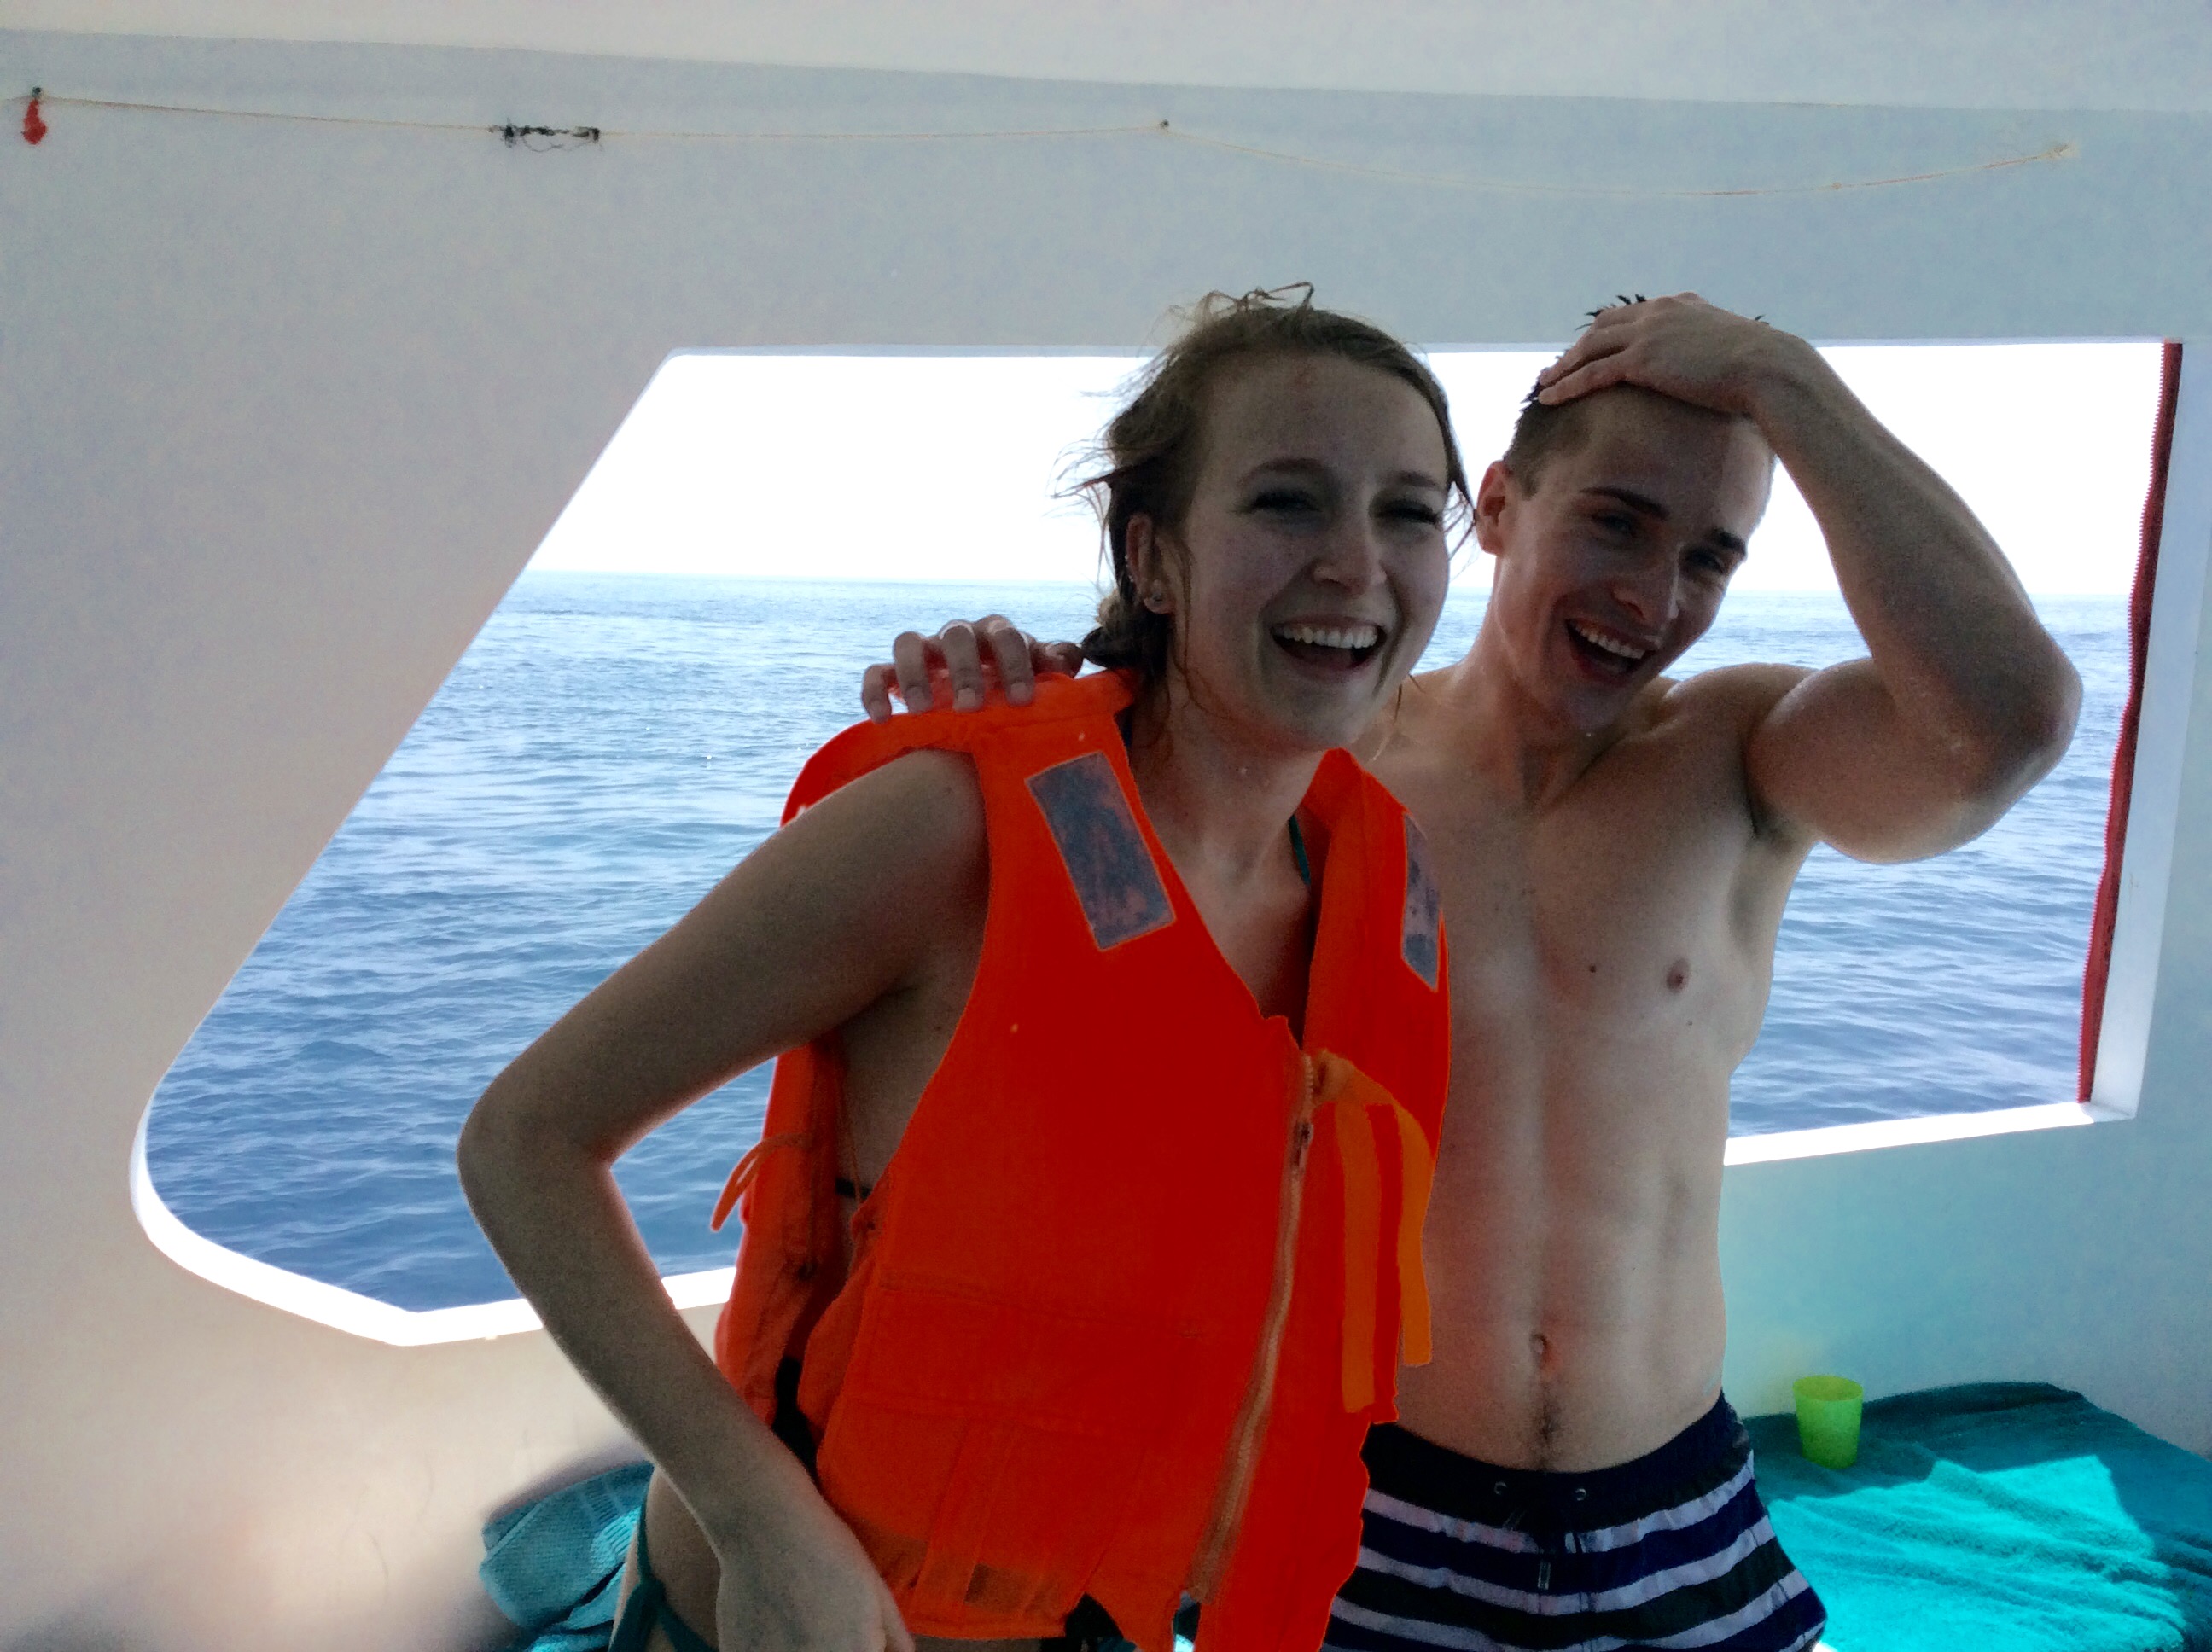 Boutique Beach Hotel Guests Smiling on Board the Dive Boat